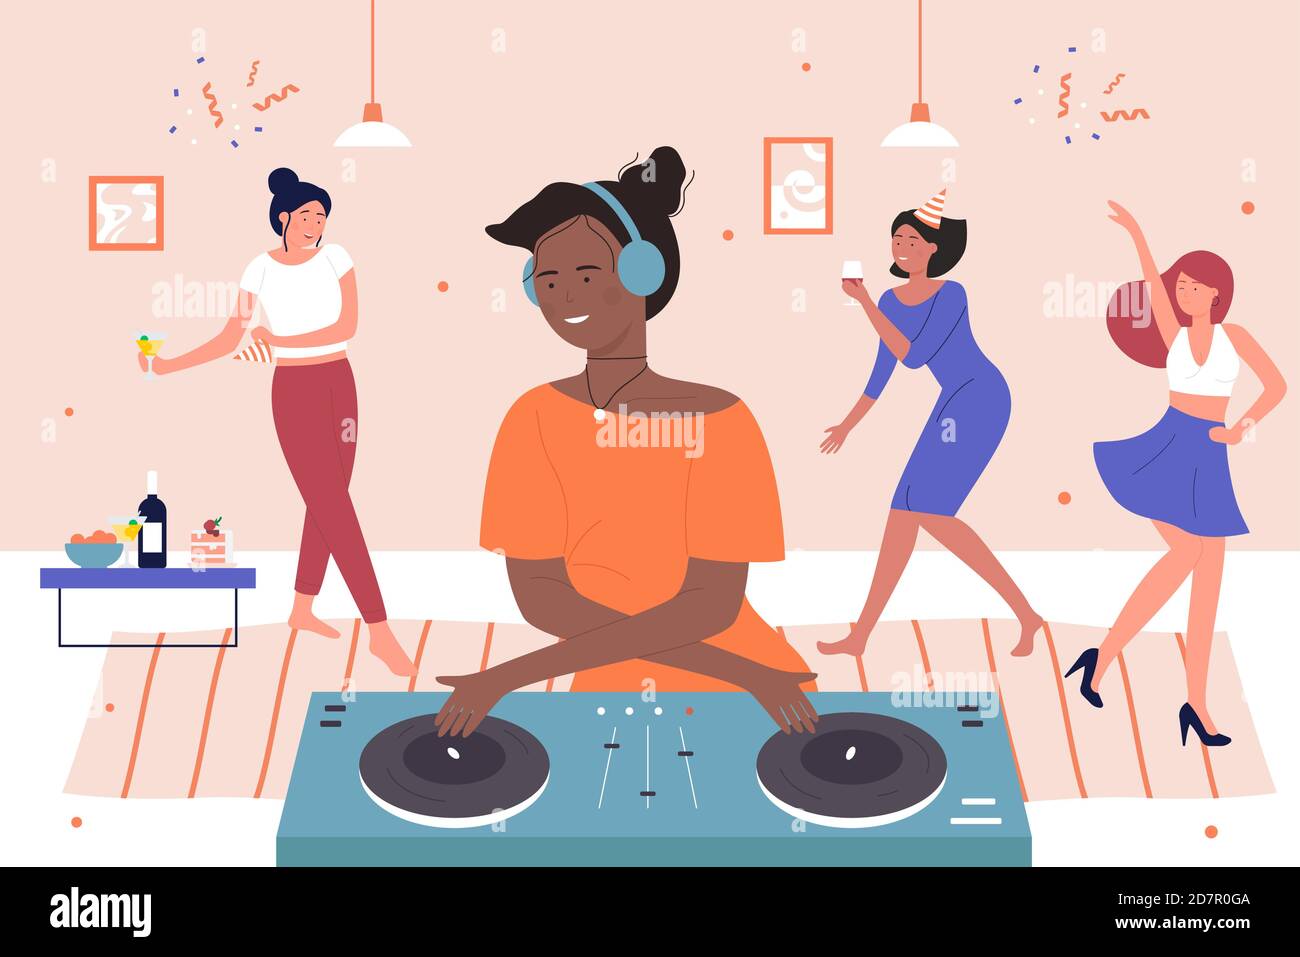 Happy friends home party with DJ vector illustration. Cartoon young black female character mixing modern digital music on turntables equipment, people dancing, drinking wine at home party Stock Vector